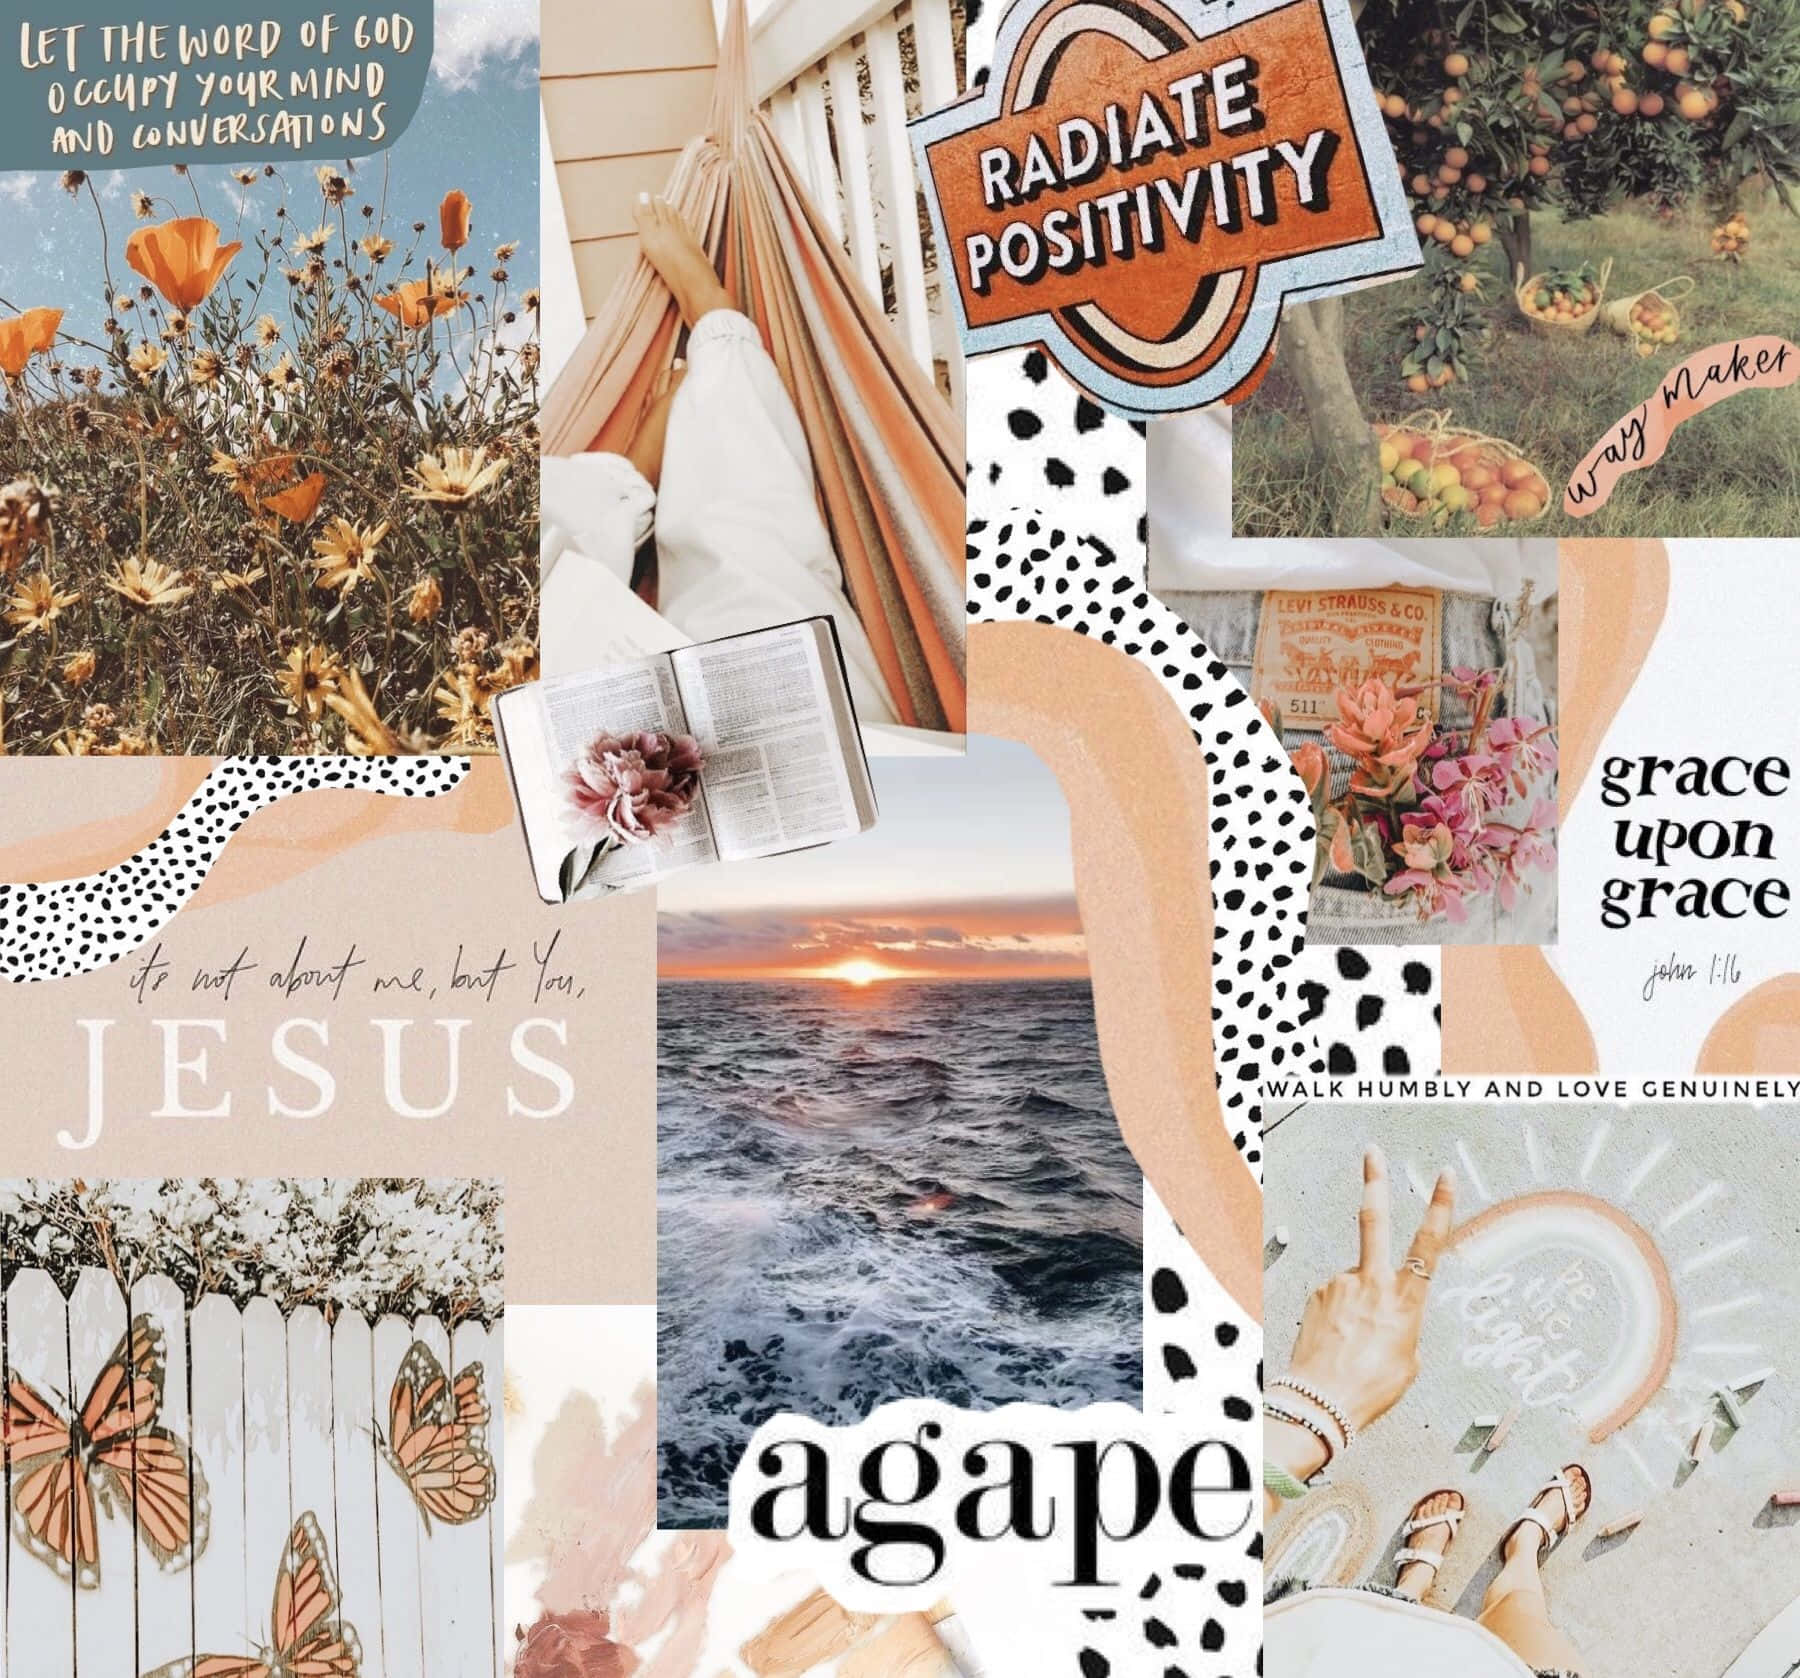 Cool Christian Soft Aesthetic Collage